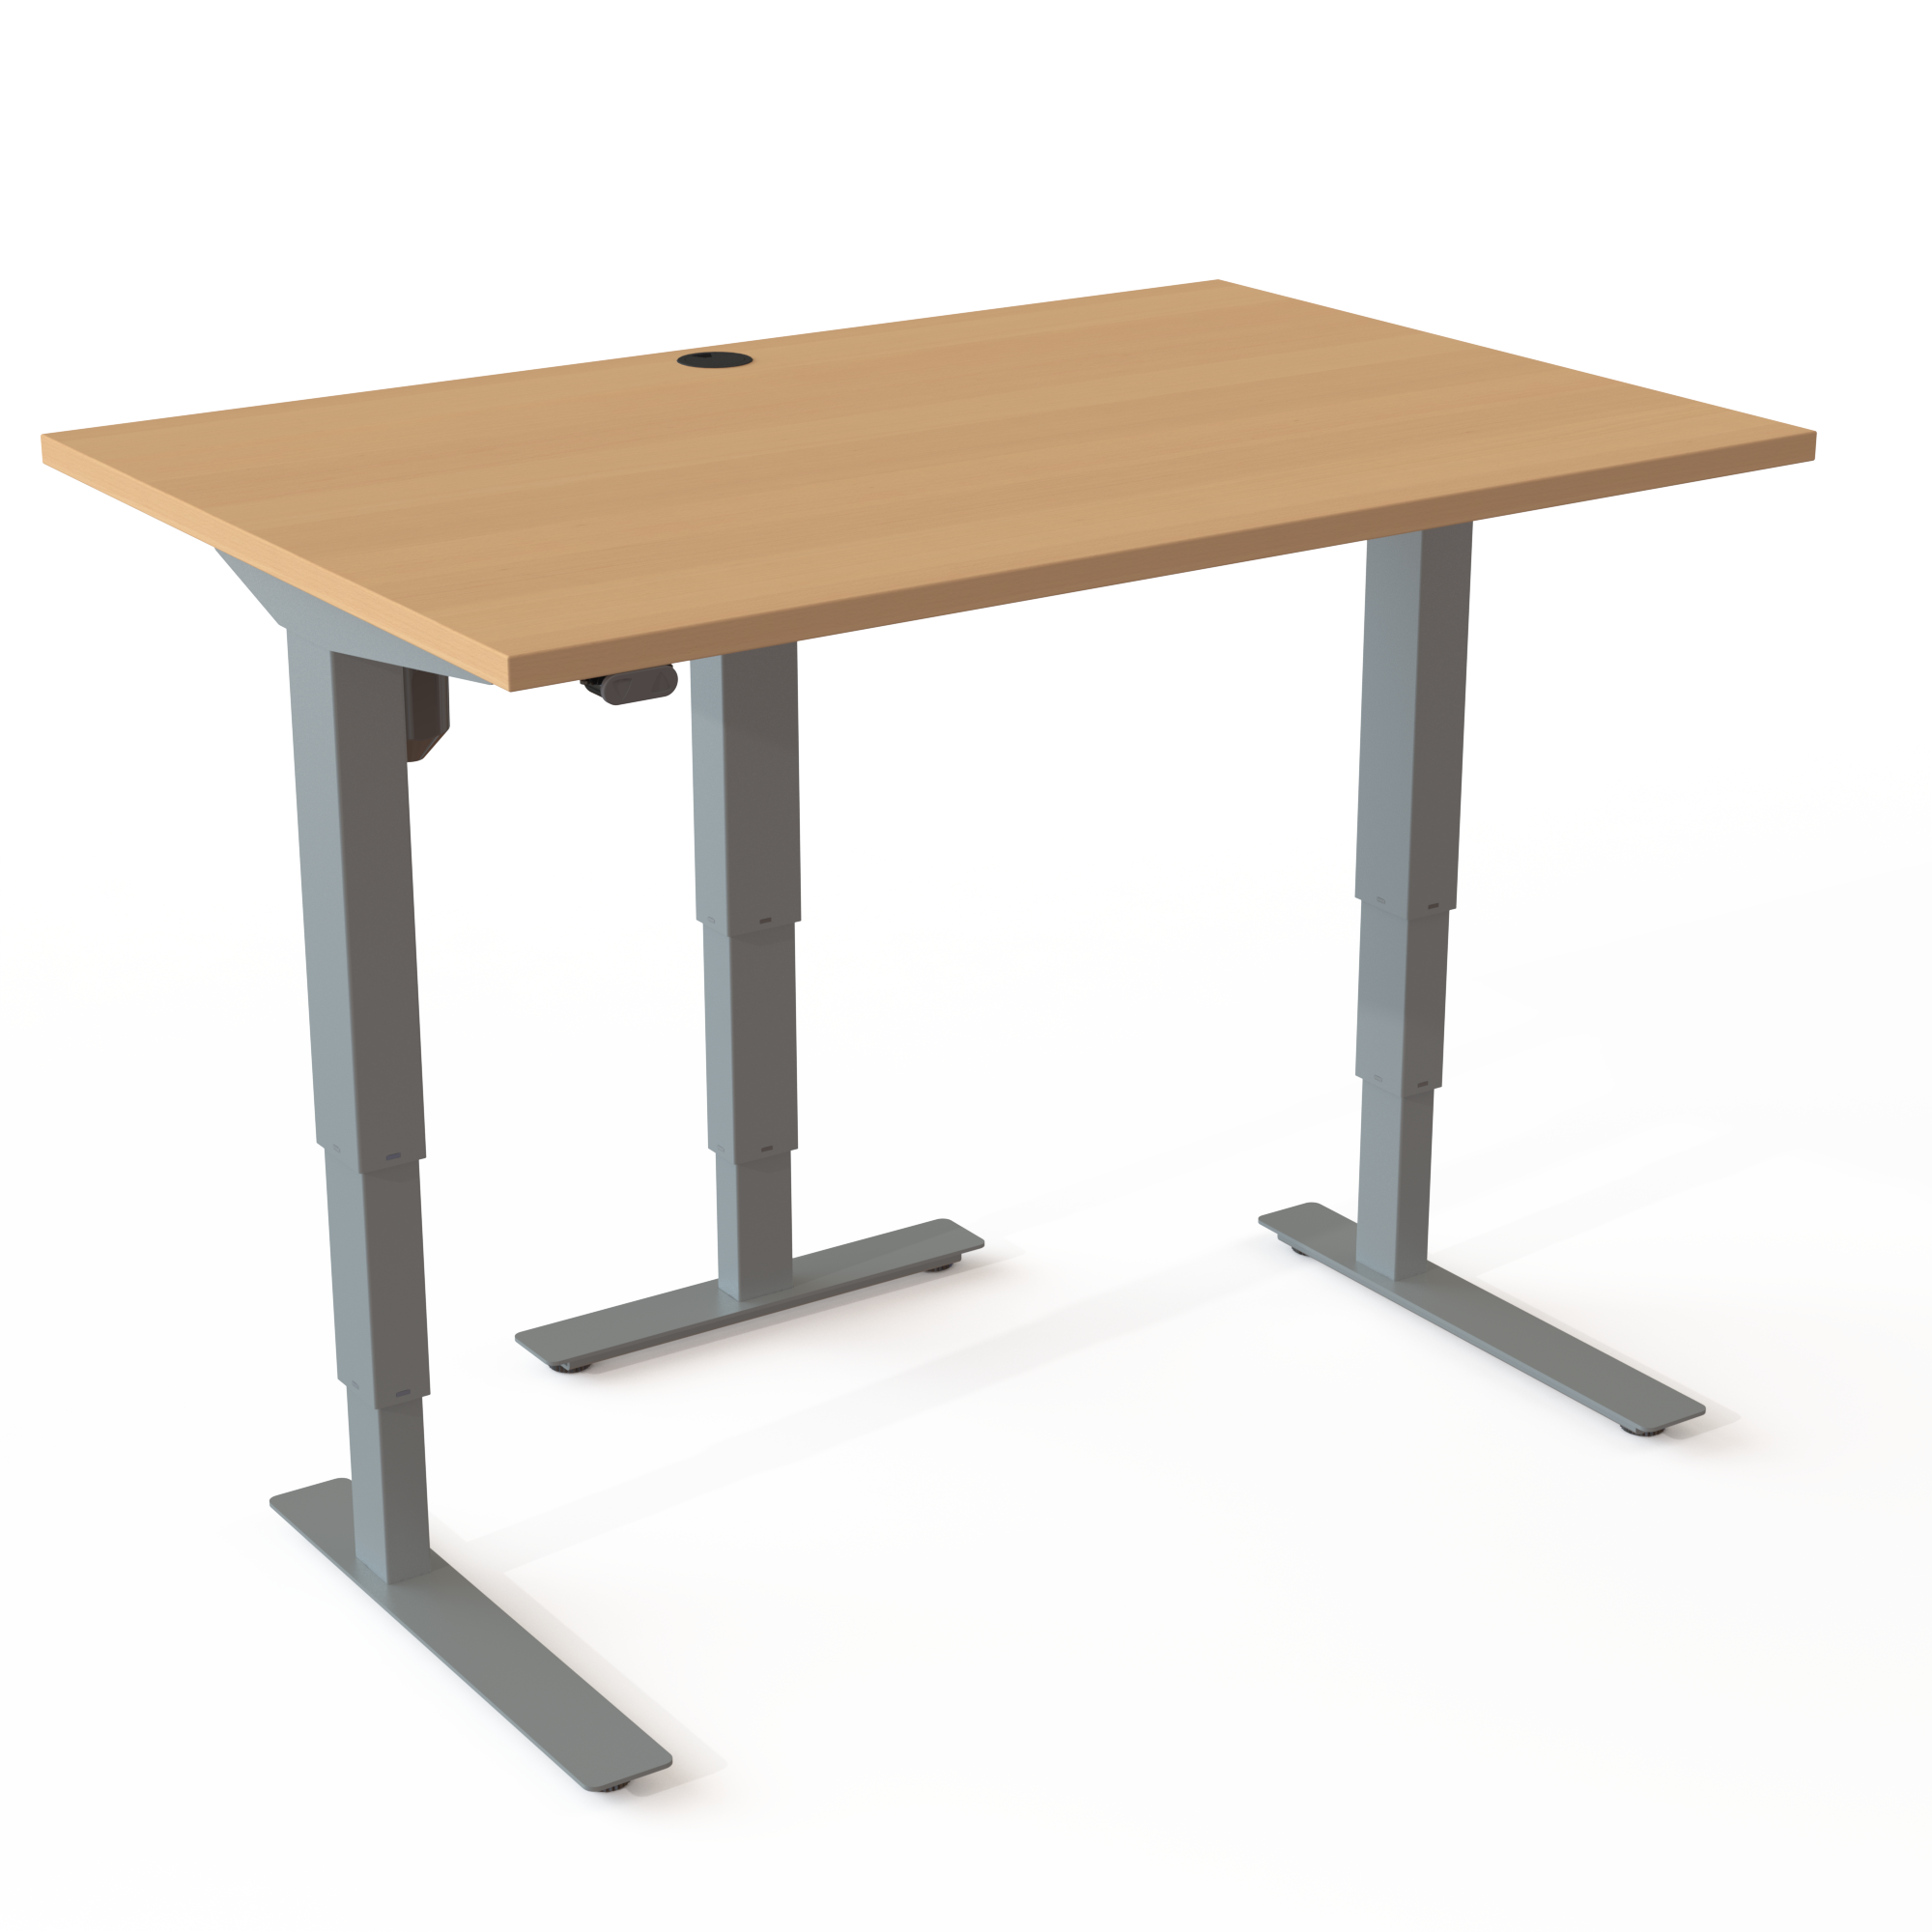 Electric Adjustable Desk | 120x80 cm | Beech with silver frame